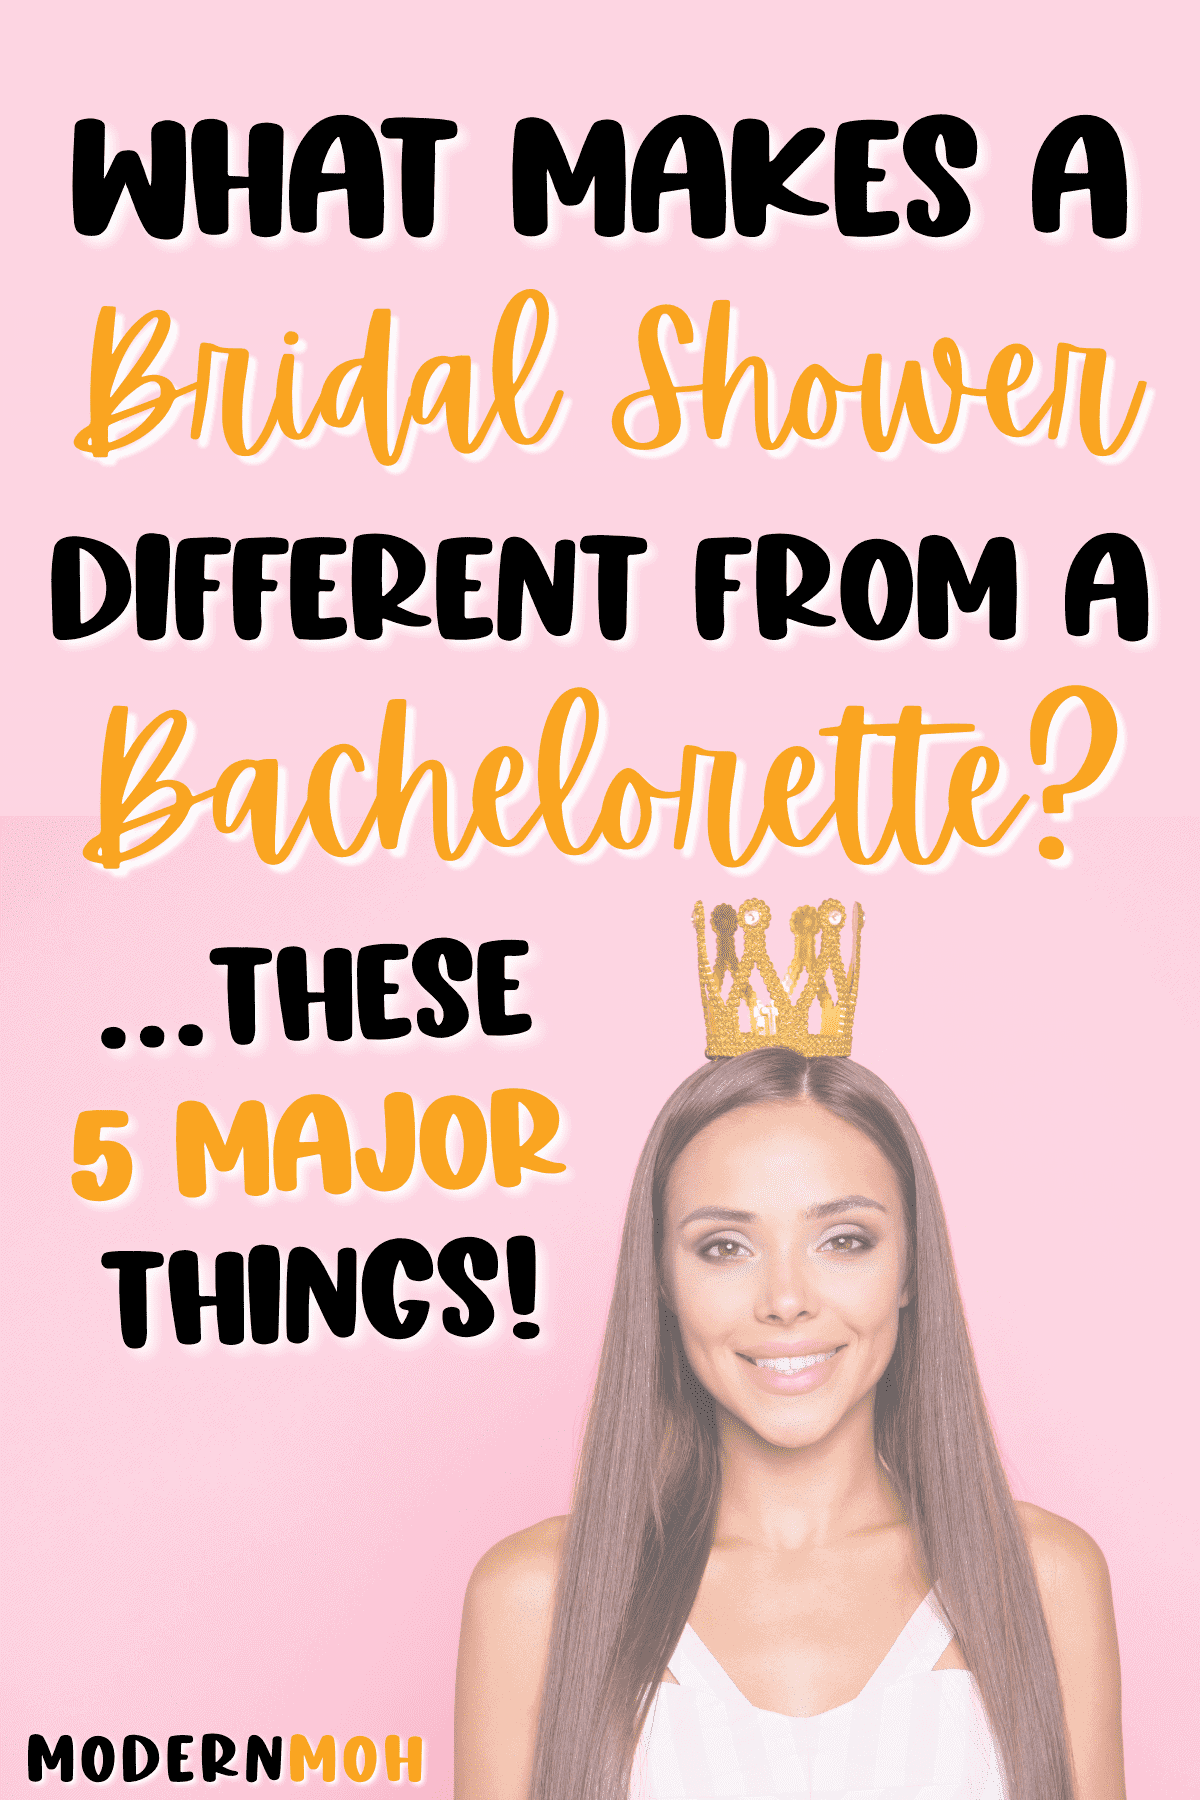 Bridal Shower vs Bachelorette Party: What's the Difference?